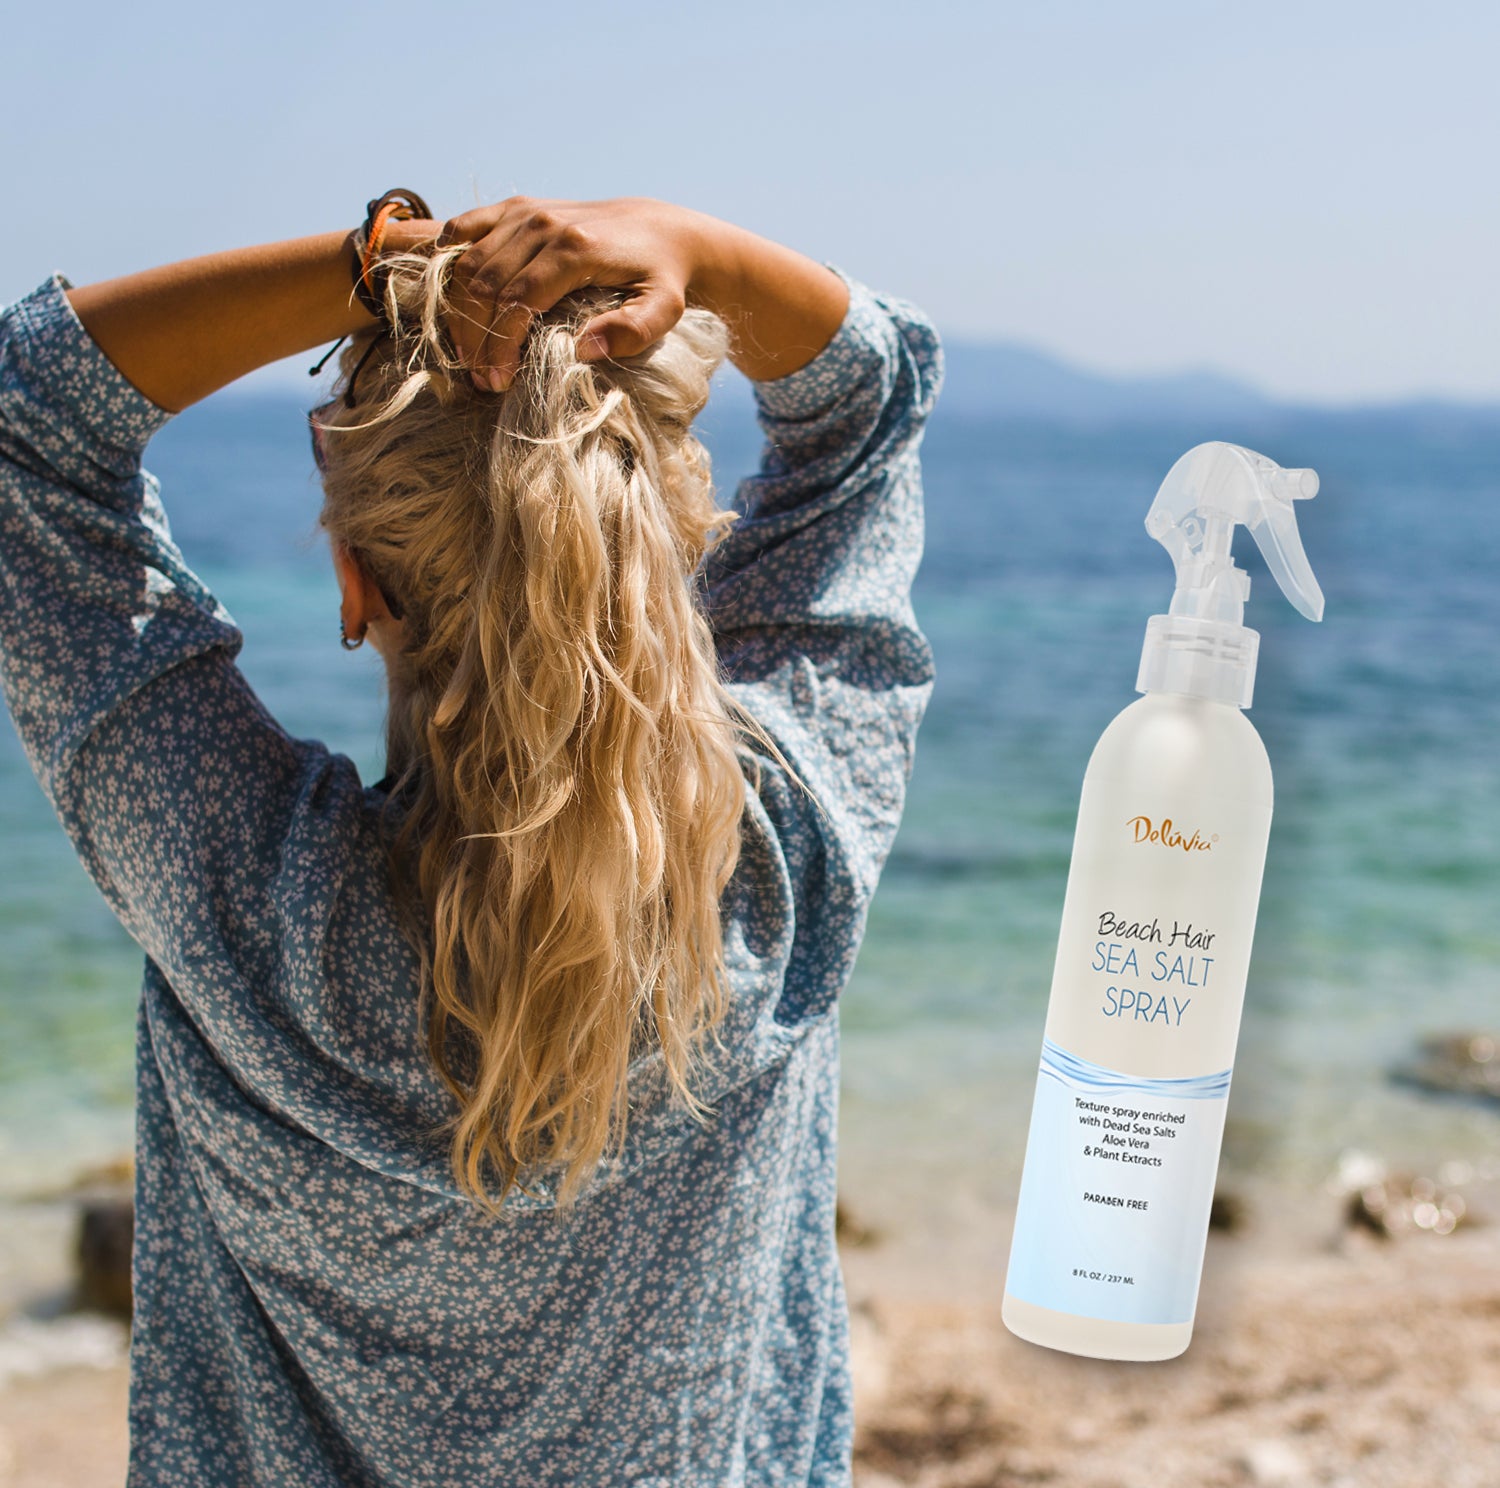 Photocomposition showing a young blonde woman facing the sea and a rocky beach in daylight, with an inclusion of a spray bottle of Deluvia's Beach Hair Sea Salt Spray